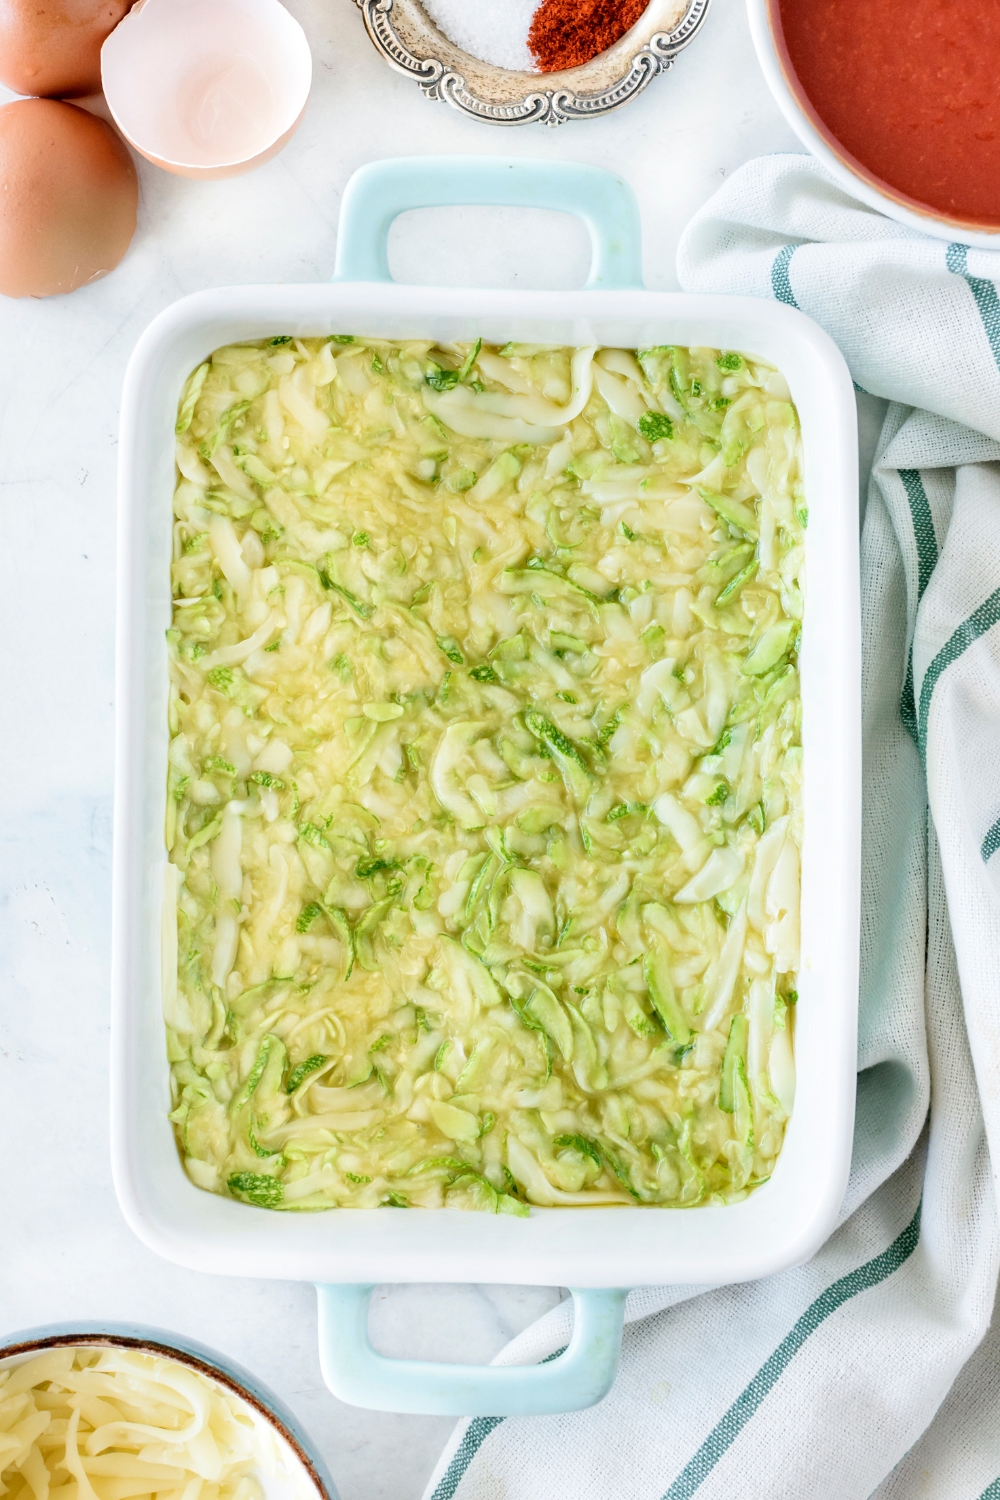 A baking dish filled with grated zucchini spread into an even layer.